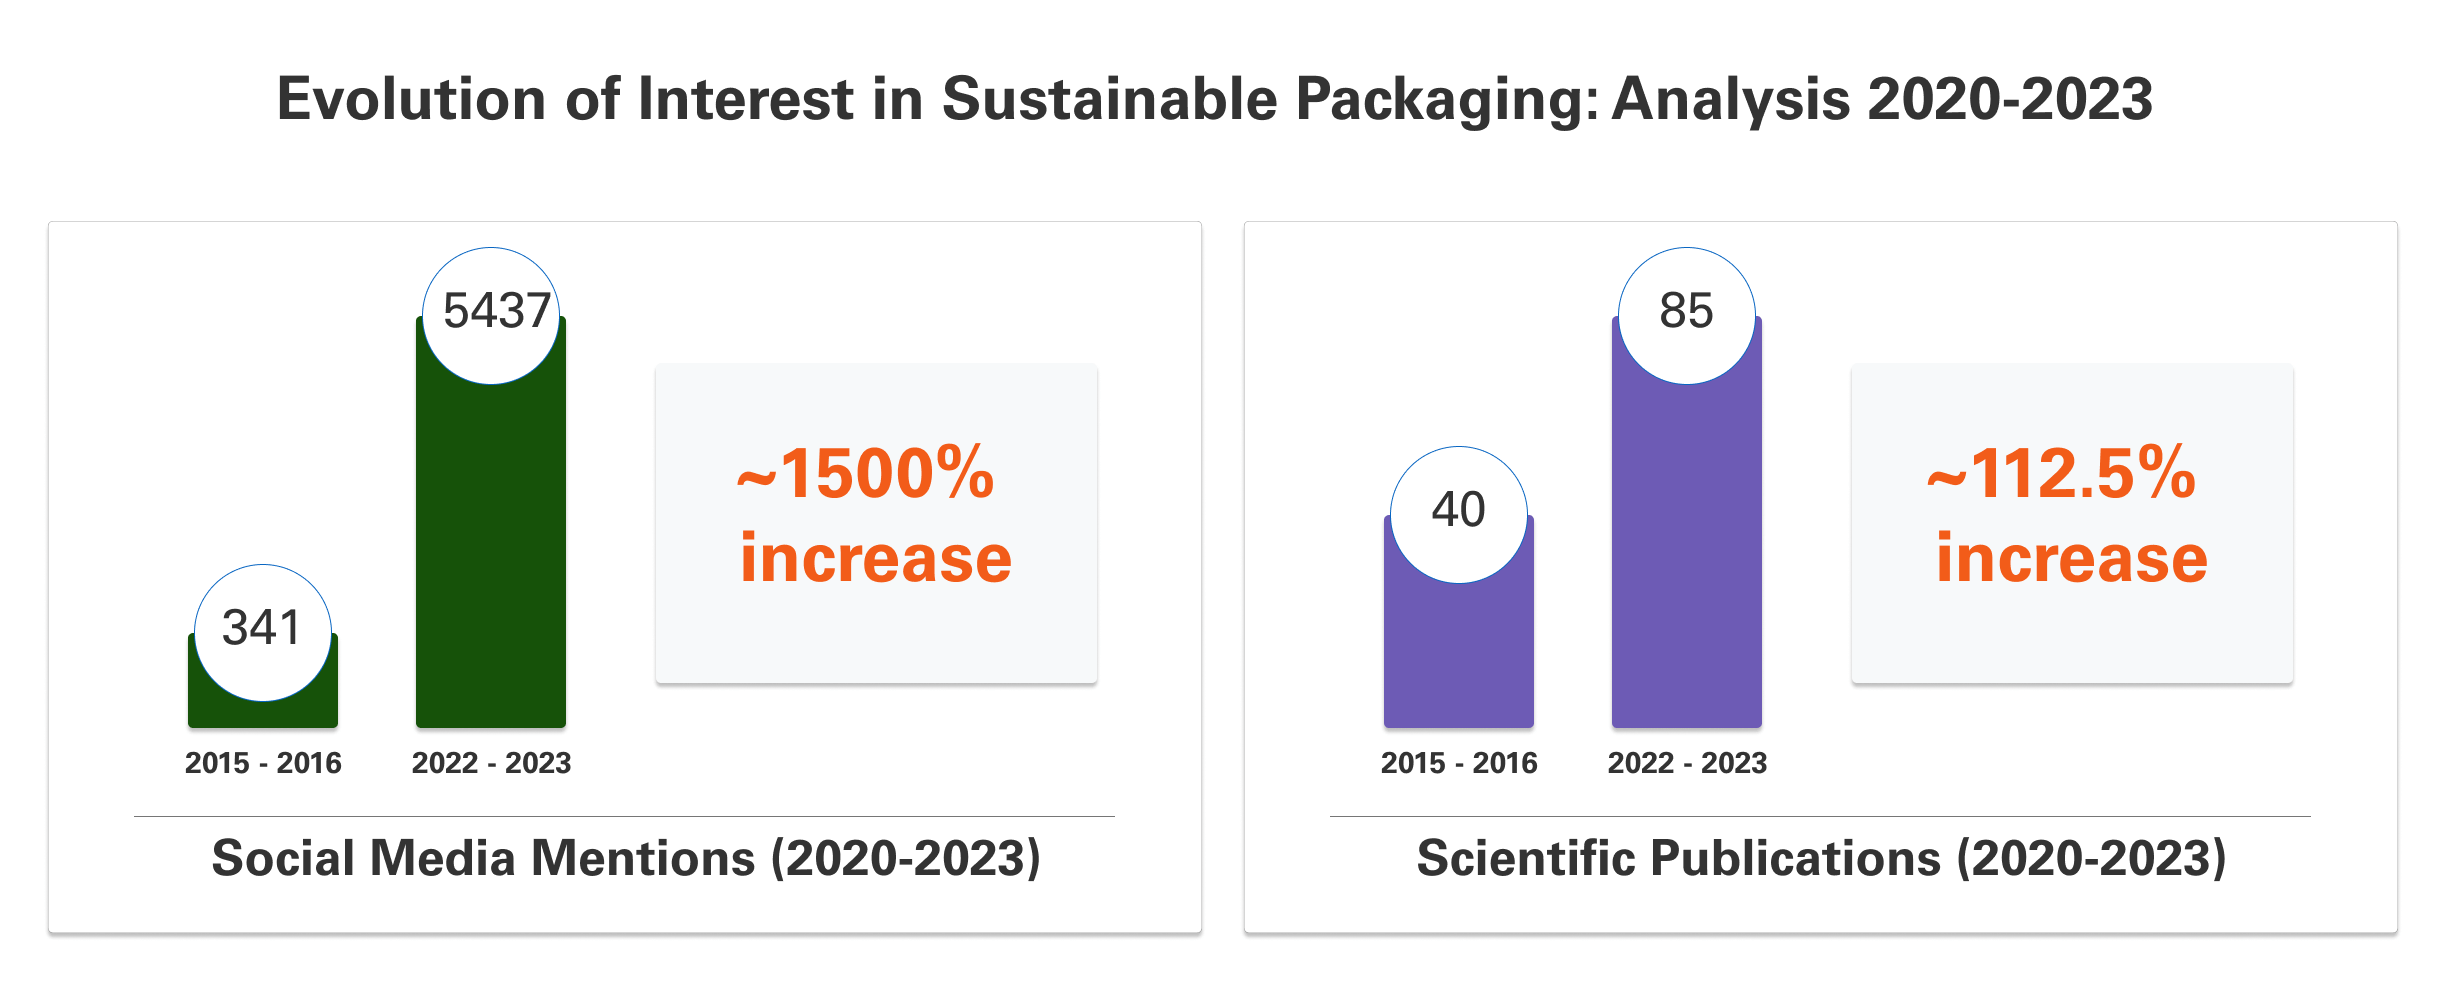 Evolution of Interest in Sustainable Packaging